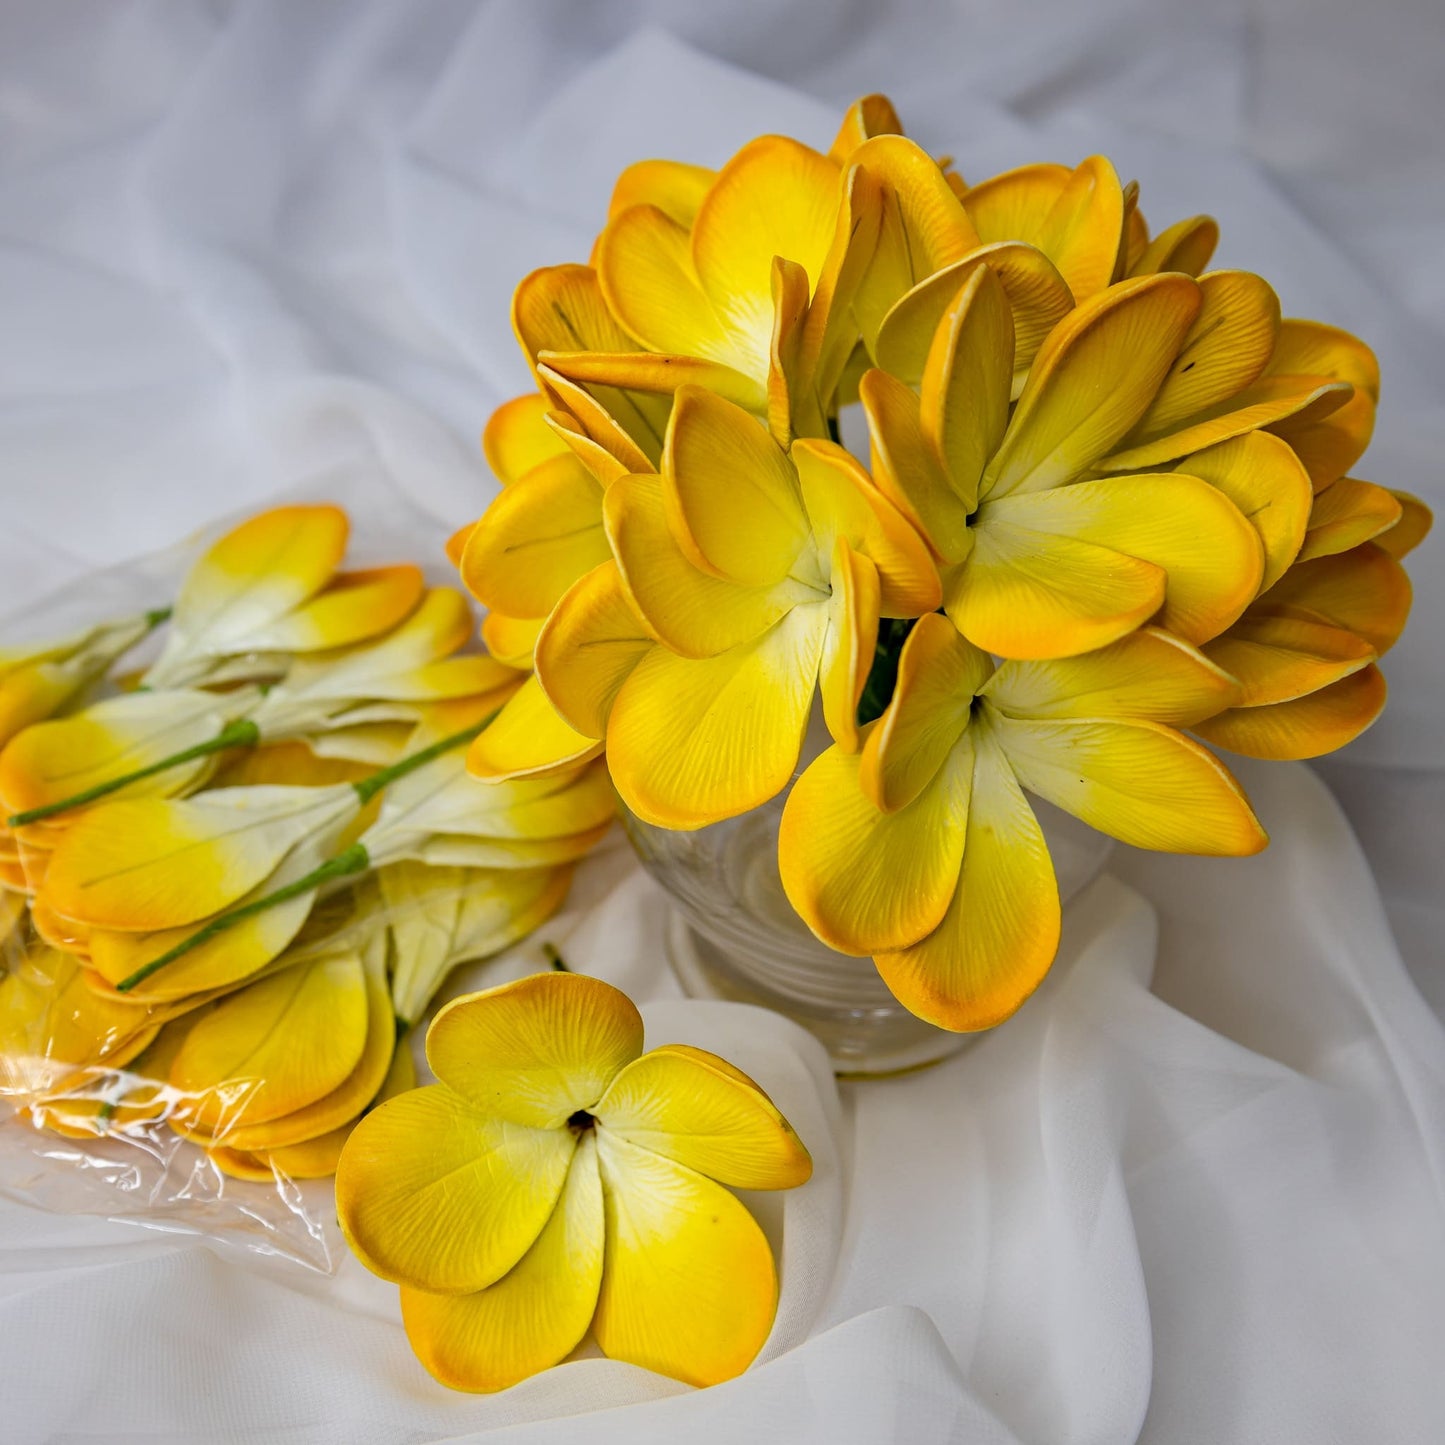 artificial tahitian gold frangipani flowers placed in transparent glass vase